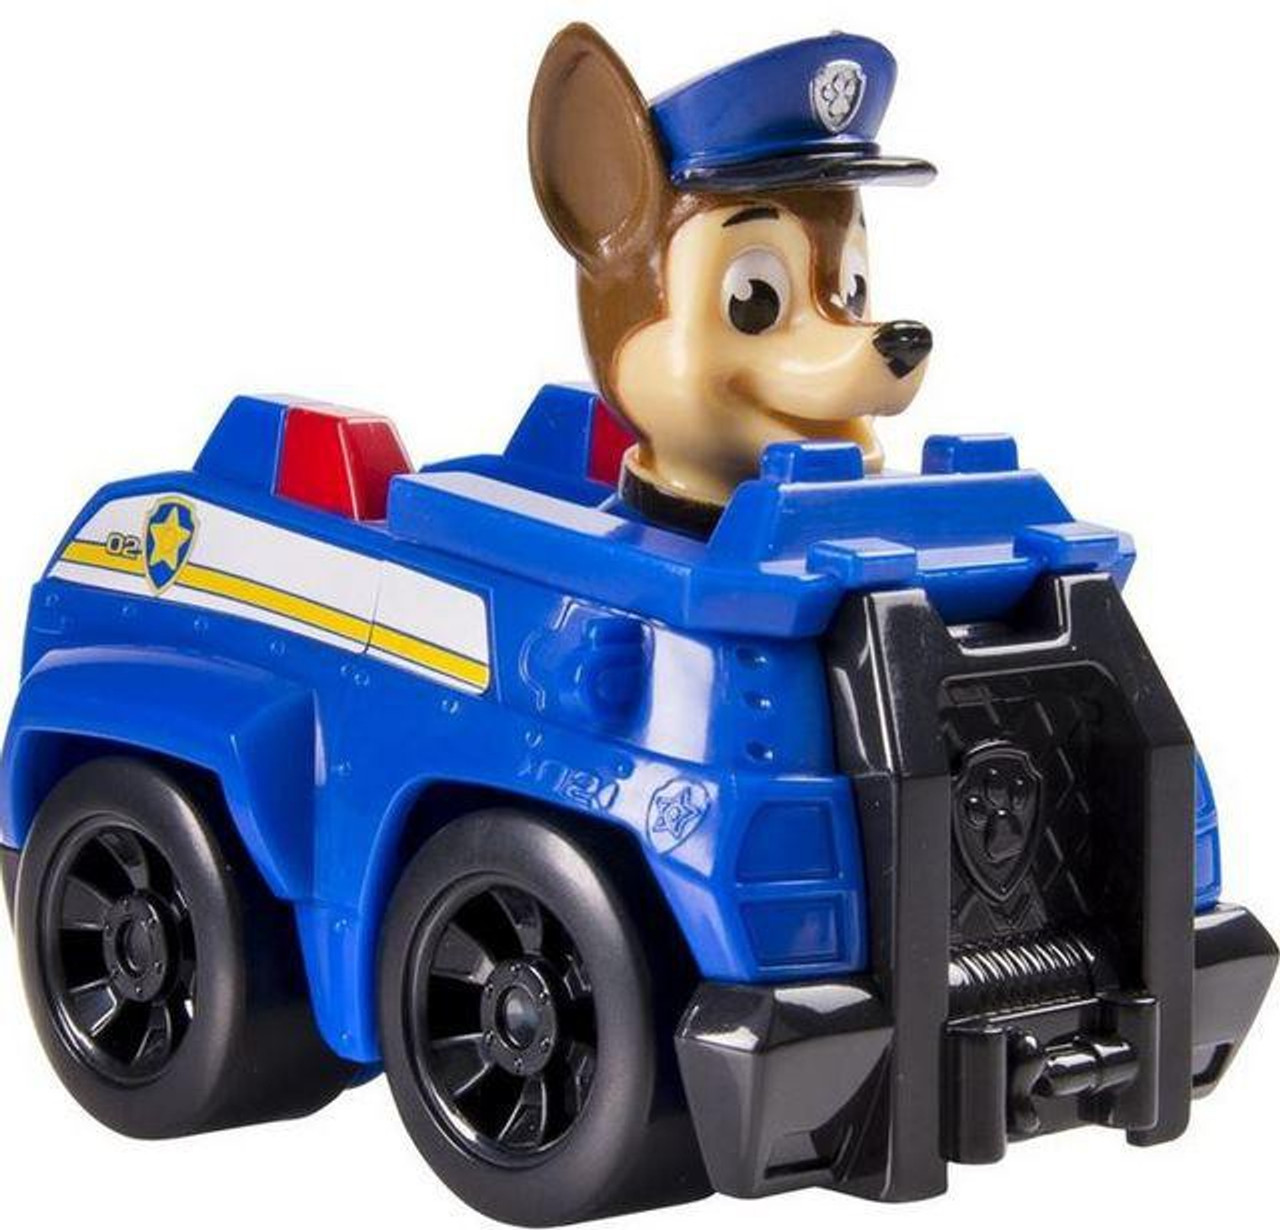 Paw Patrol Rescue Racer Chase in Police Vehicle Figure ...